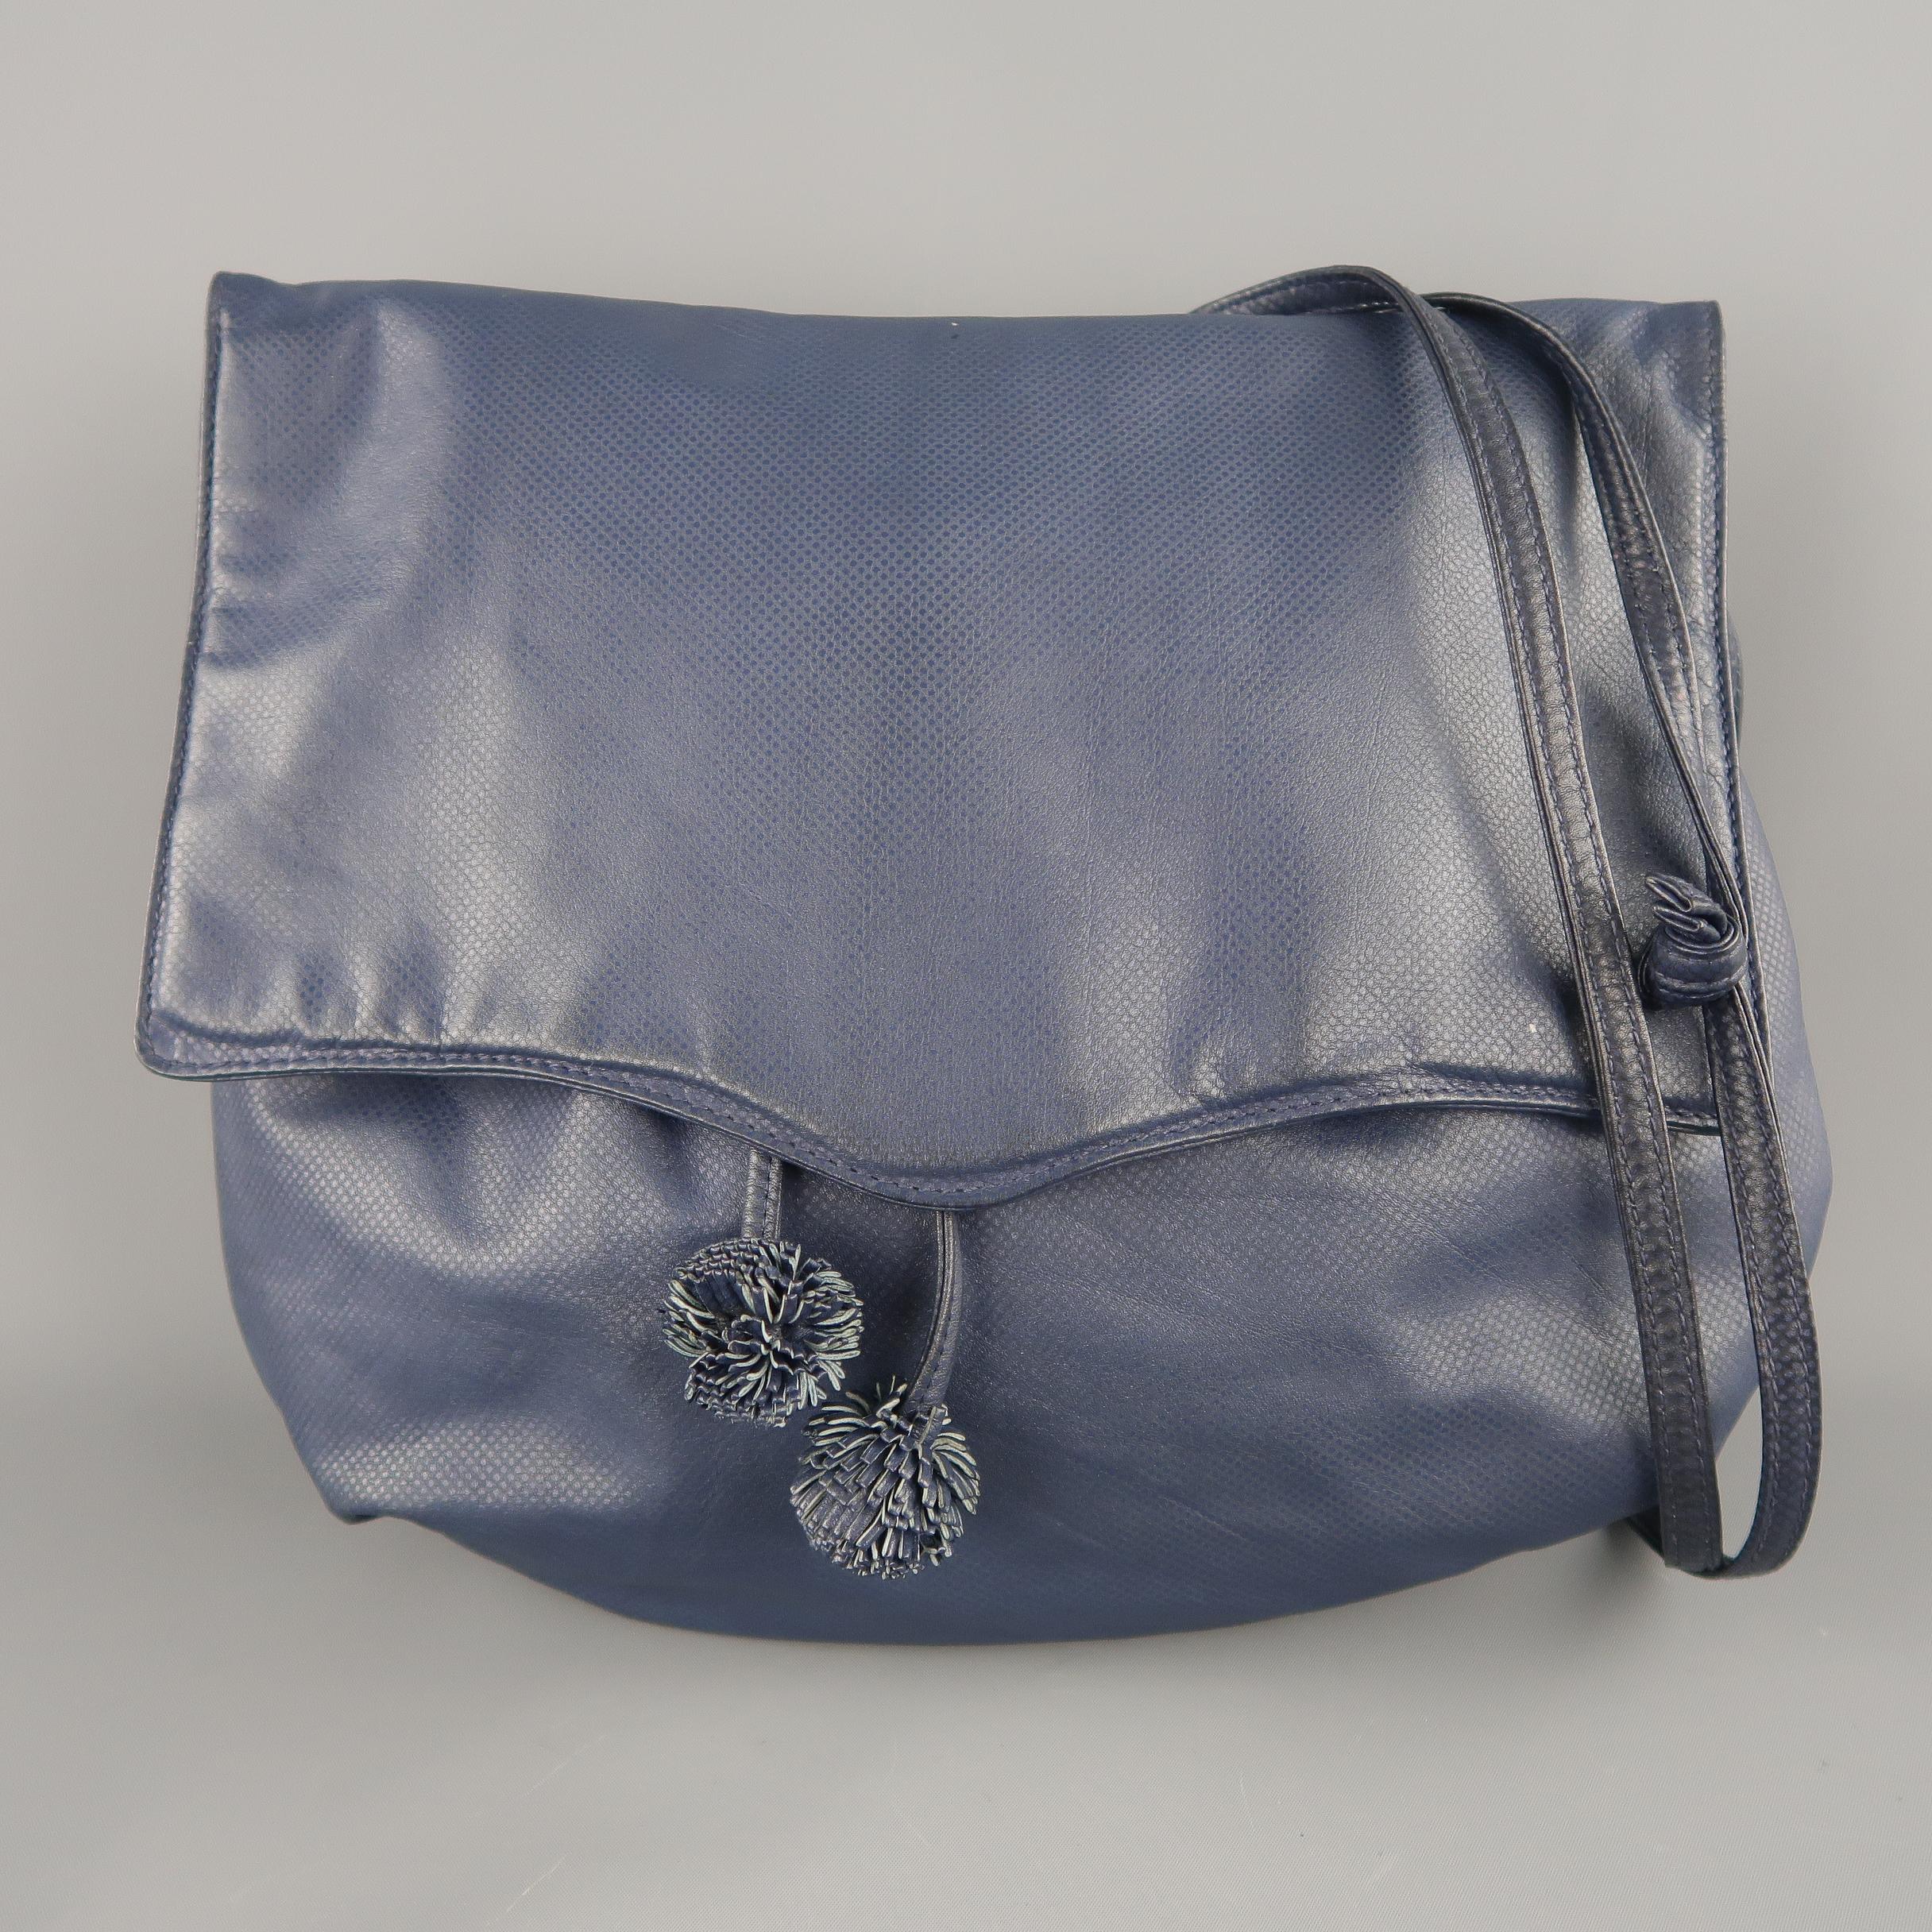 Vintage Bottega Veneta handbag comes in textured navy blue leather with a top flap, frontal compartment with gathered top, double ball tassels, double skinny straps, and leather interior with zip pocket. Includes Mirror. Discolorations on sides.